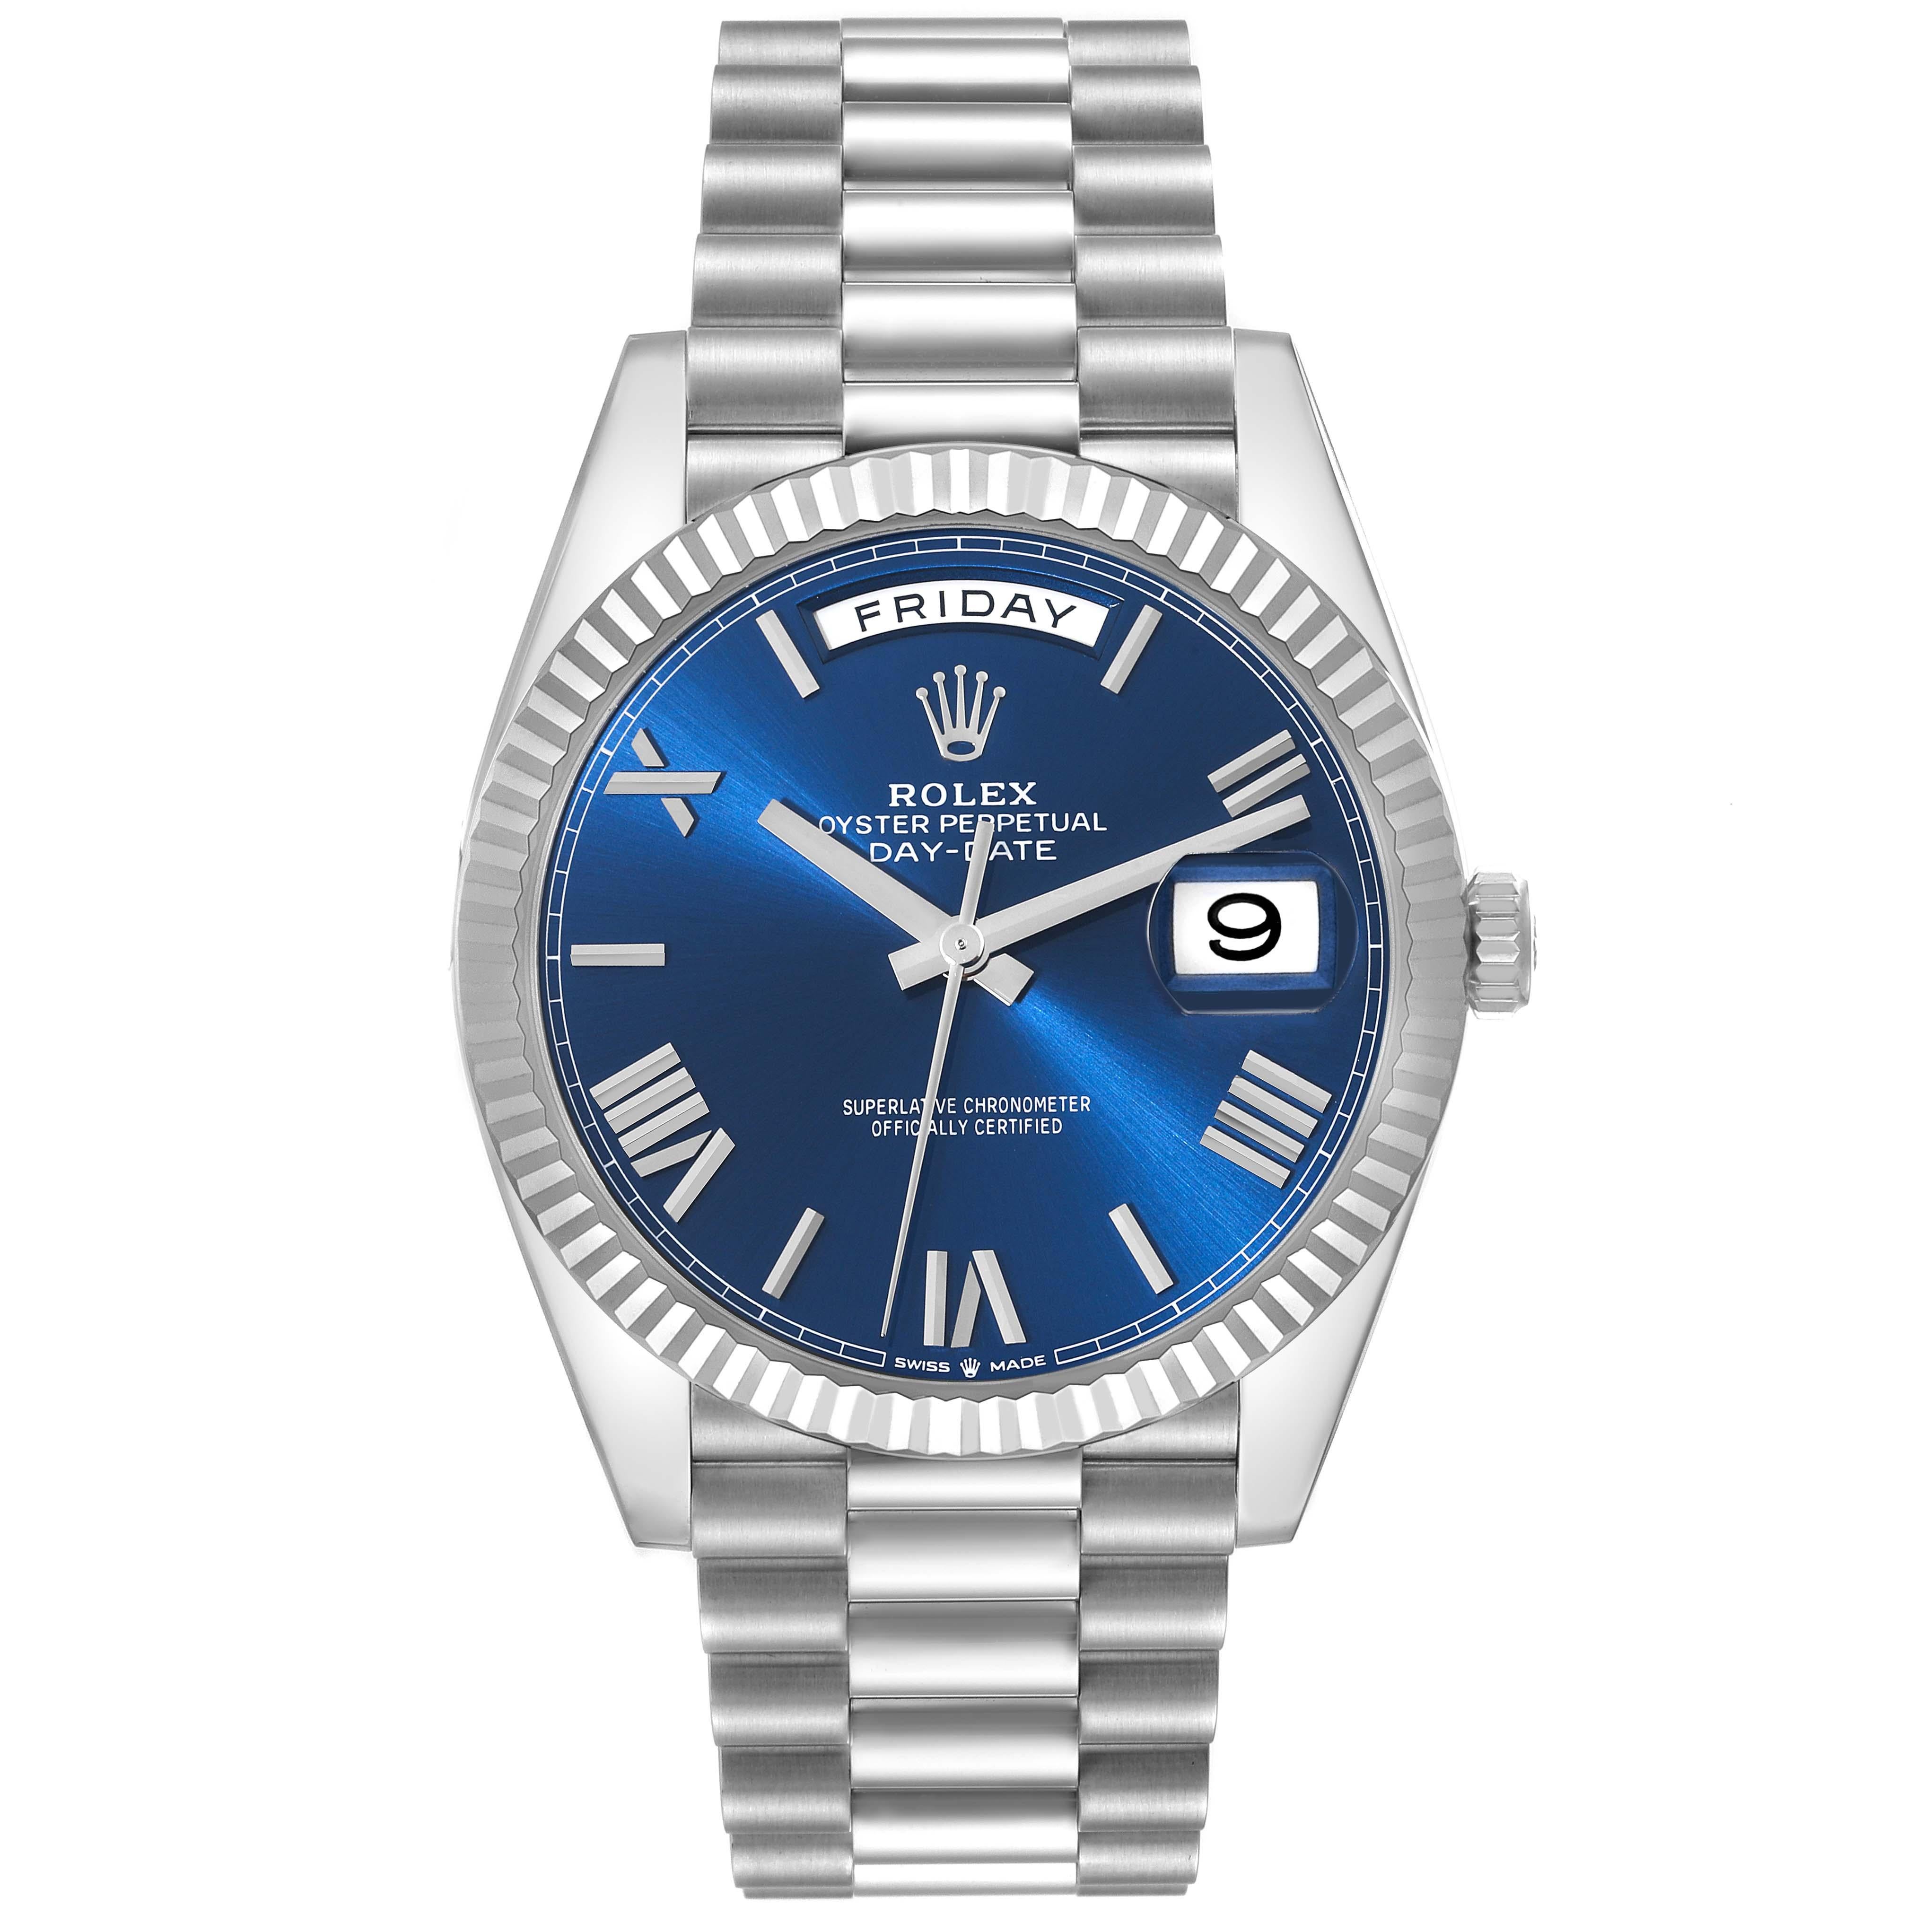 Rolex President Day-Date 40 Blue Dial Platinum Mens Watch 228236 Unworn. Officially certified chronometer self-winding movement. Double quick set function. Platinum oyster case 40.0 mm in diameter.  Rolex logo on a crown. Platinum fluted bezel.